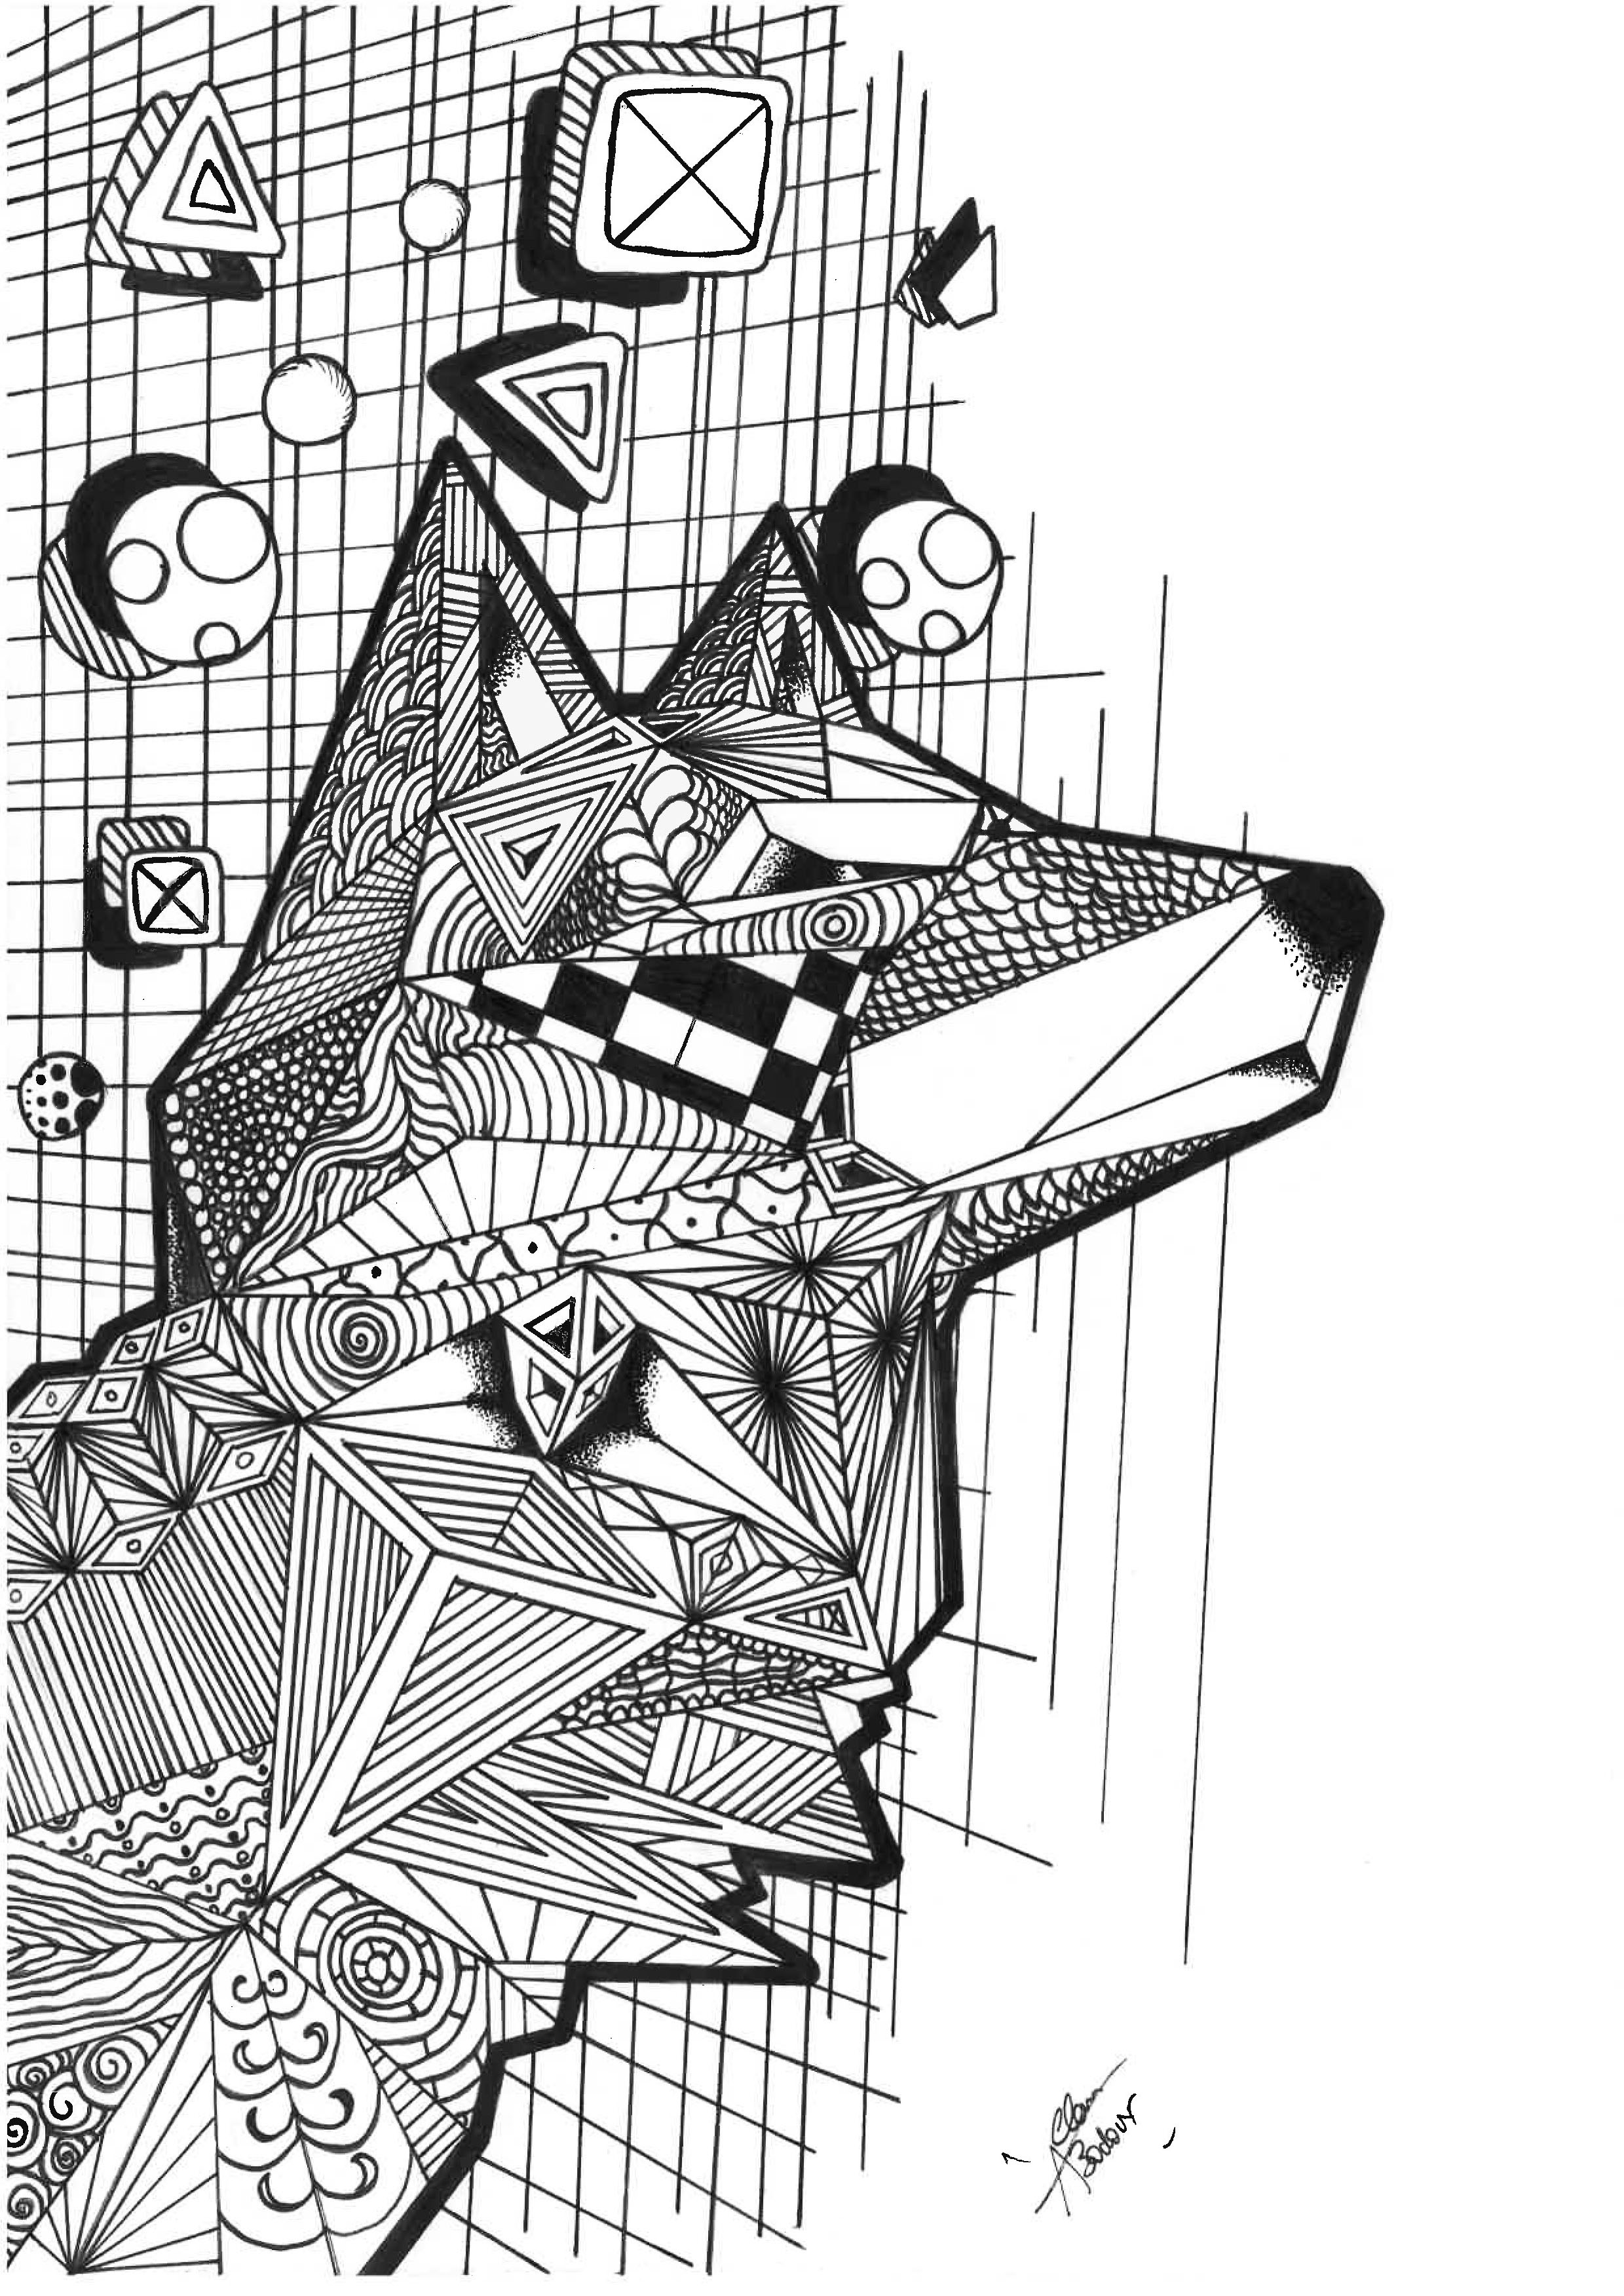 Download Wolf with geometric patterns - Wolves Adult Coloring Pages